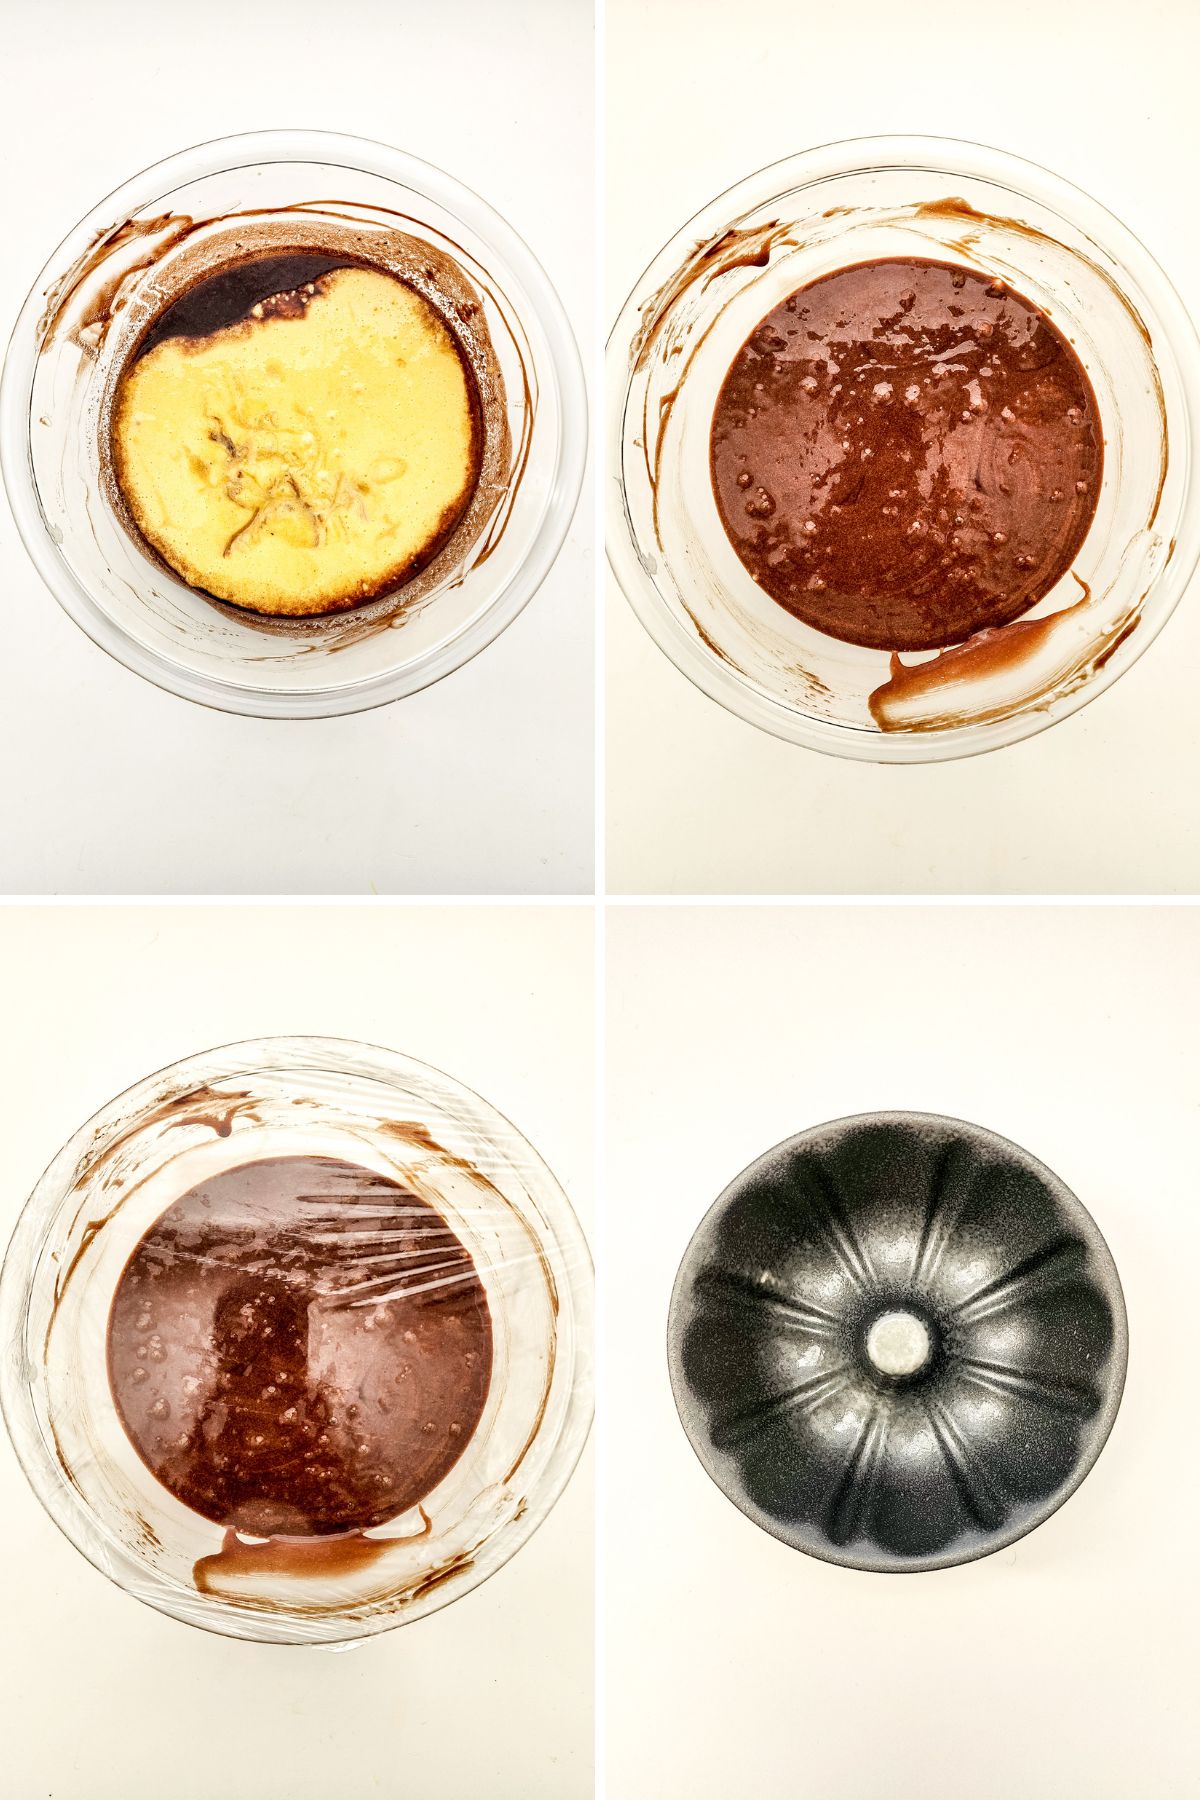 A collage of images showing how to make a lava cake.